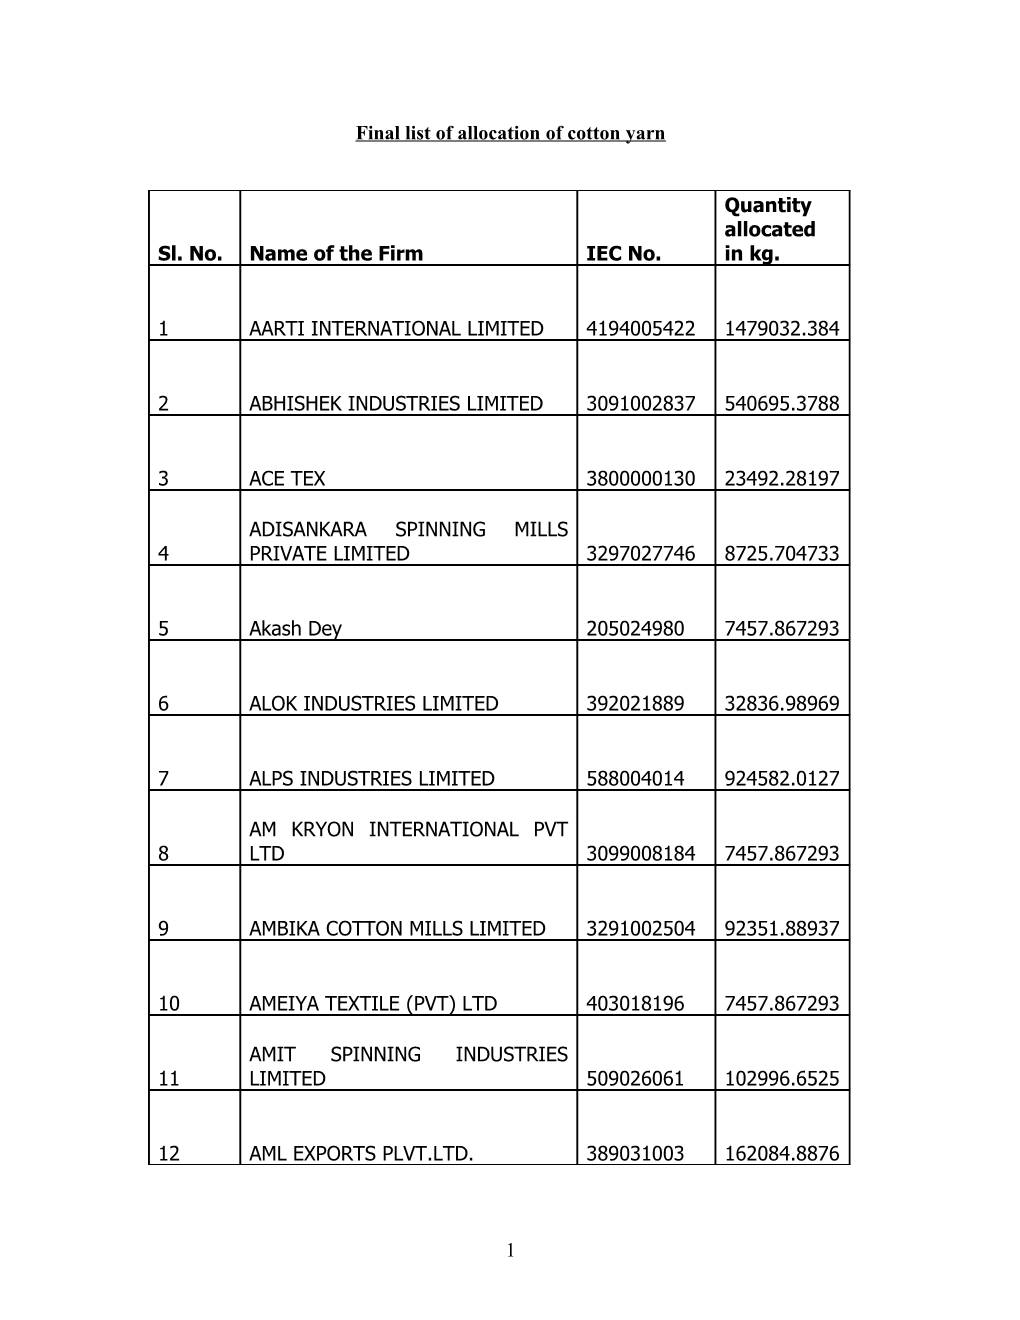 Final List of Allocation of Cotton Yarn